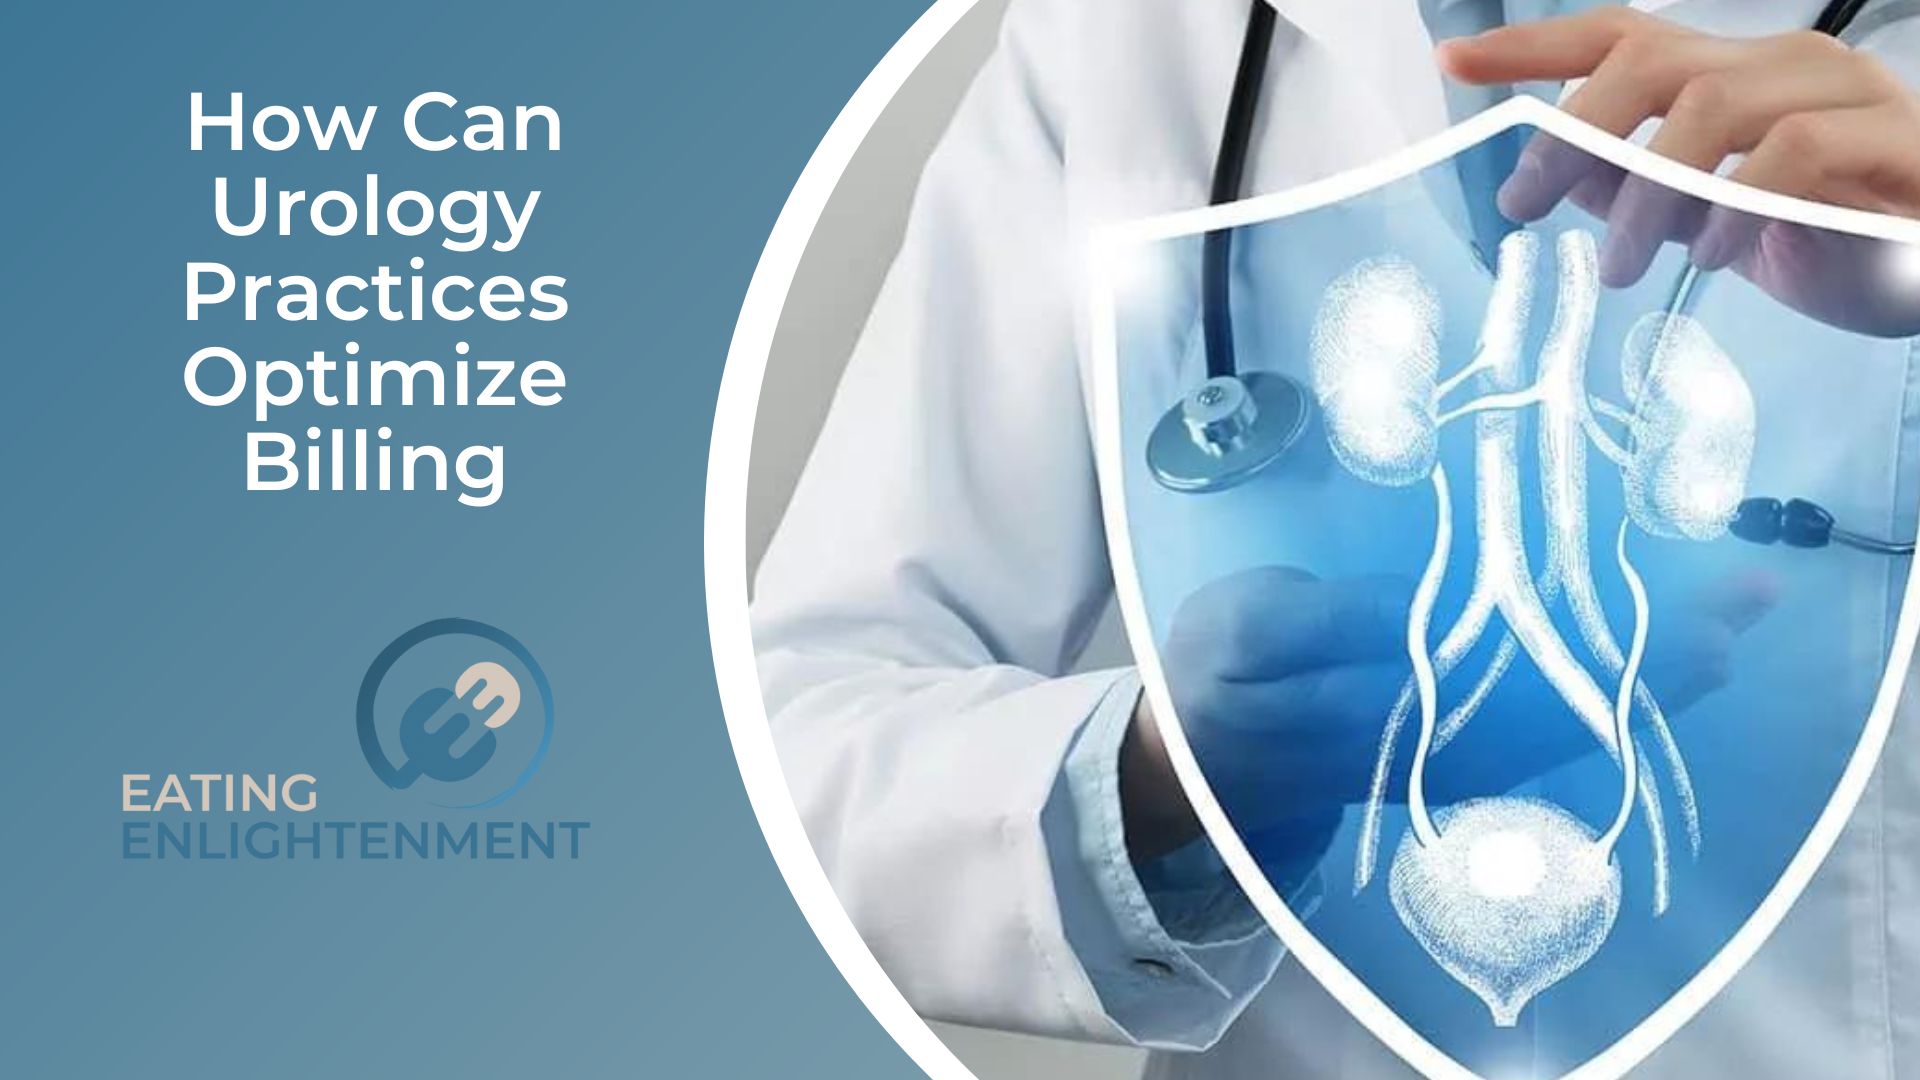 How Can Urology Practices Optimize Billing